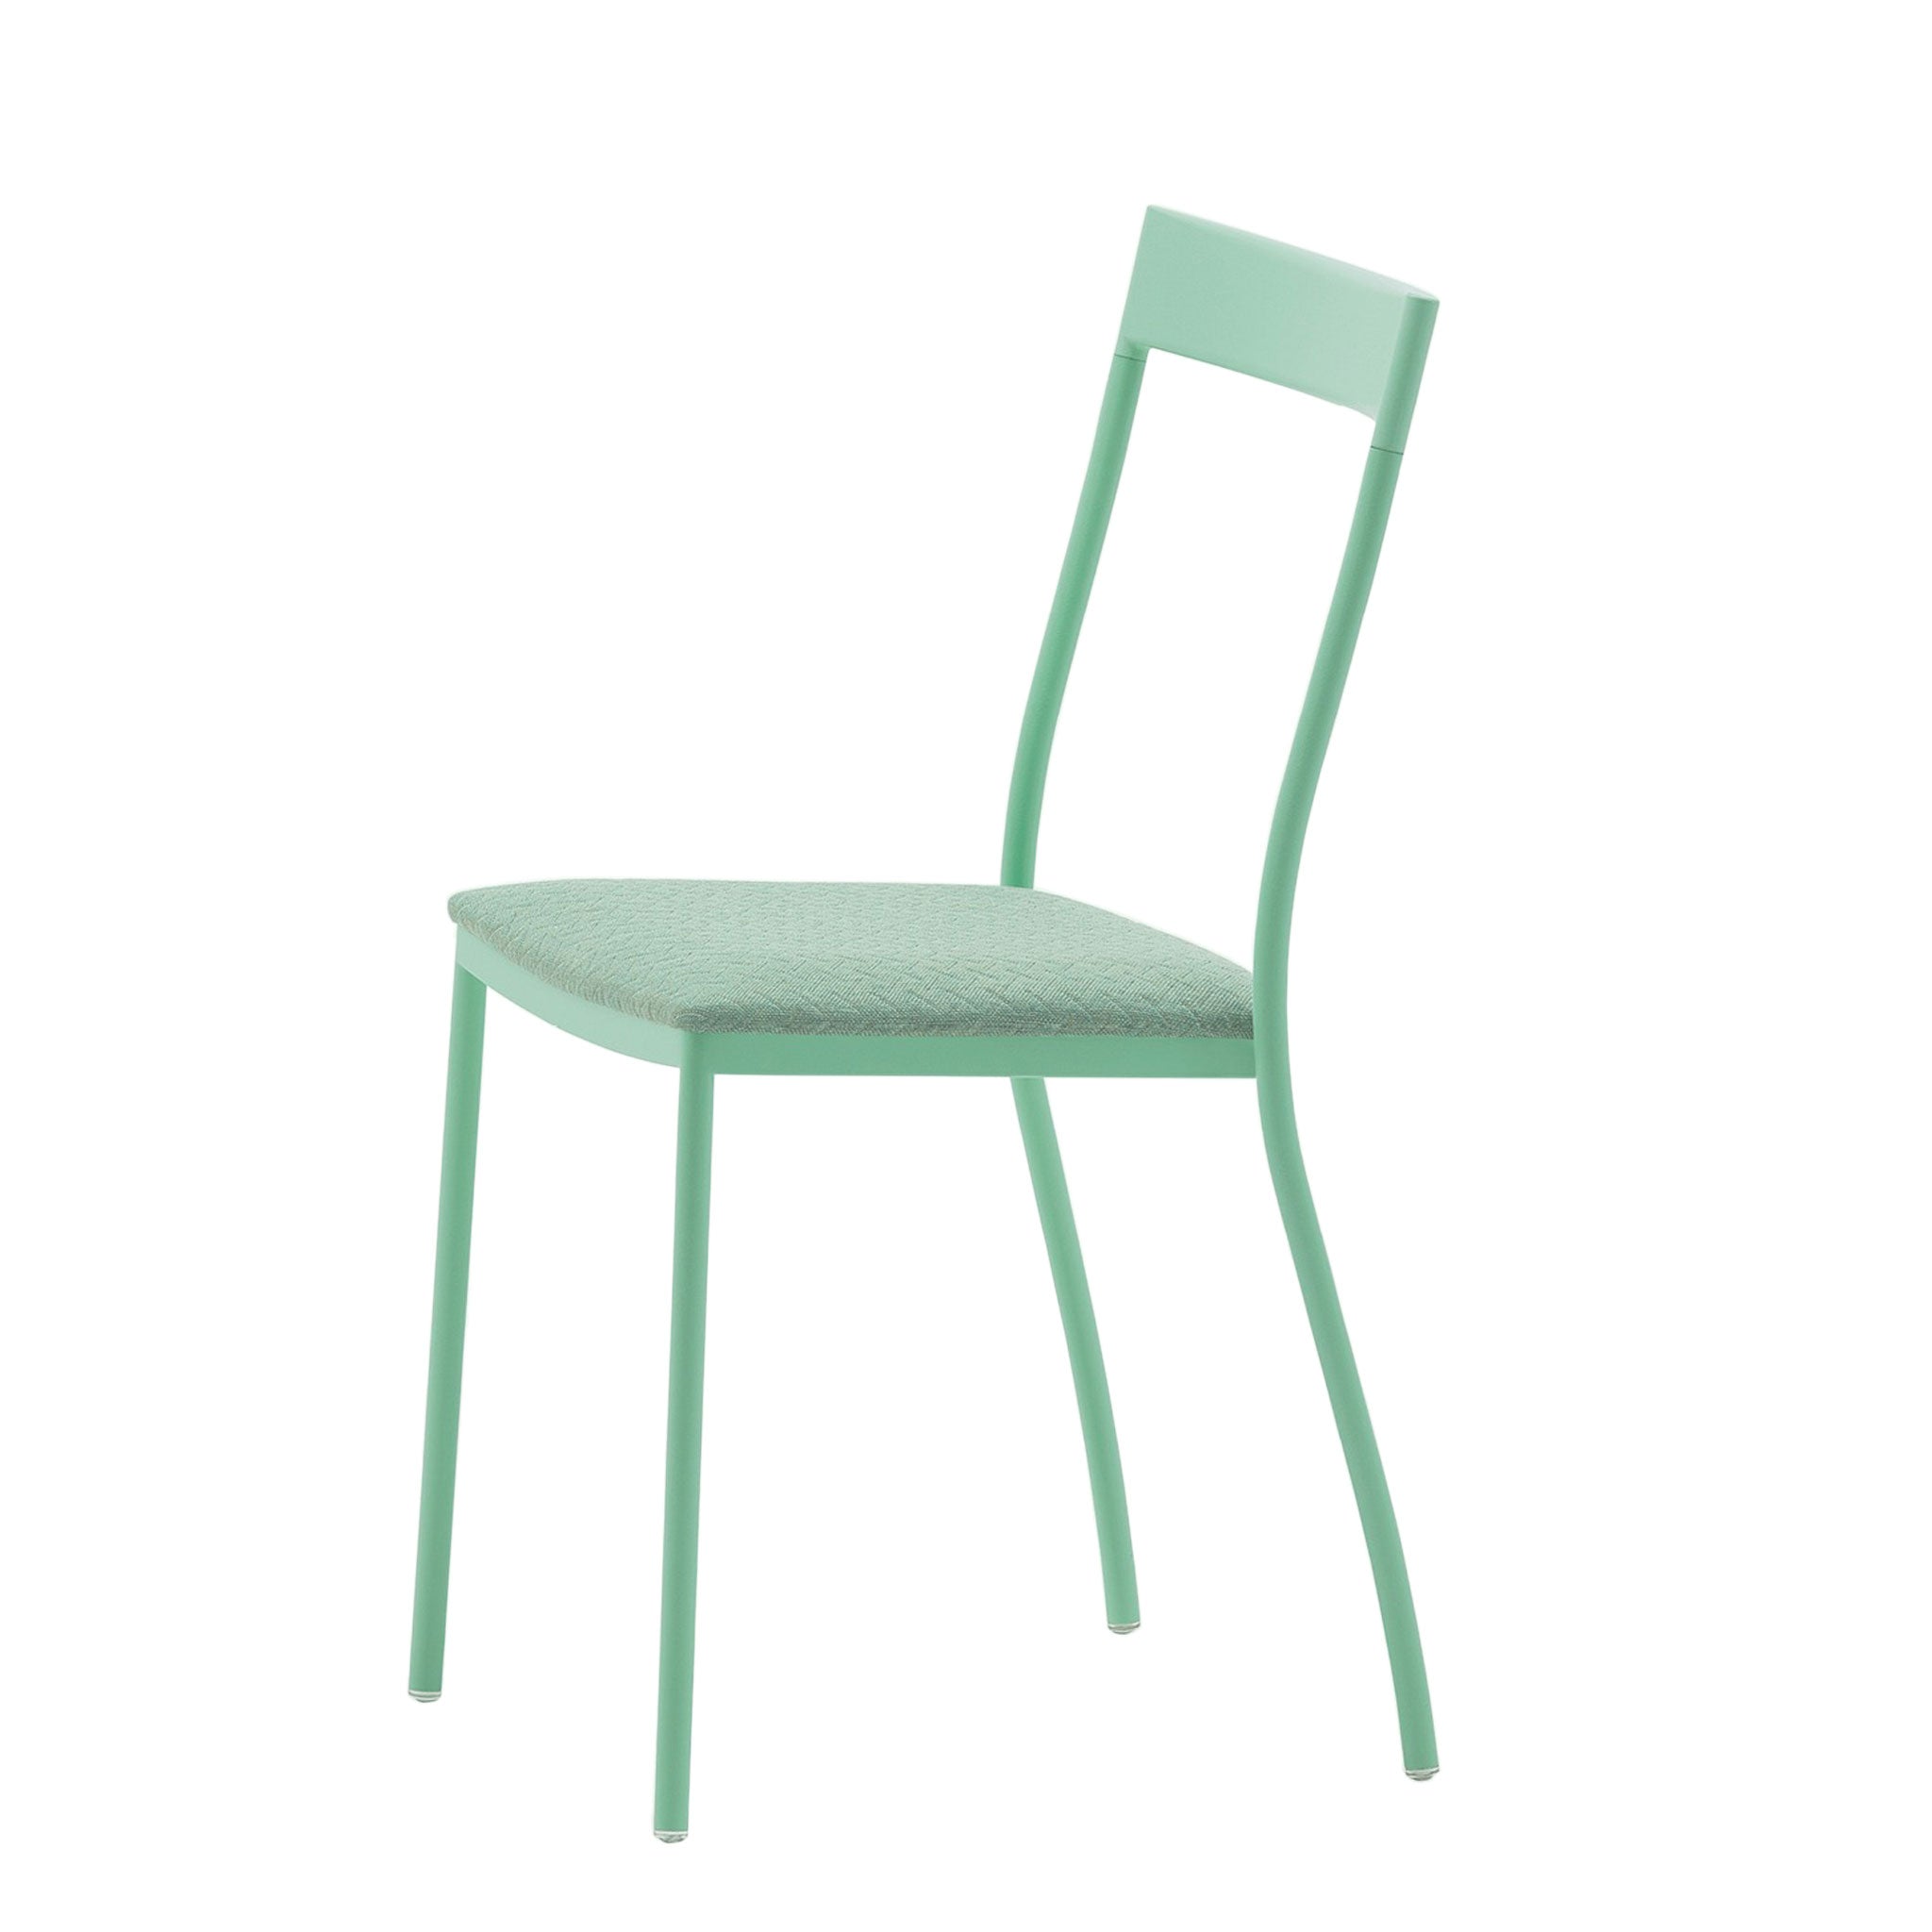 Twigz Café Chair - Seat Upholstered